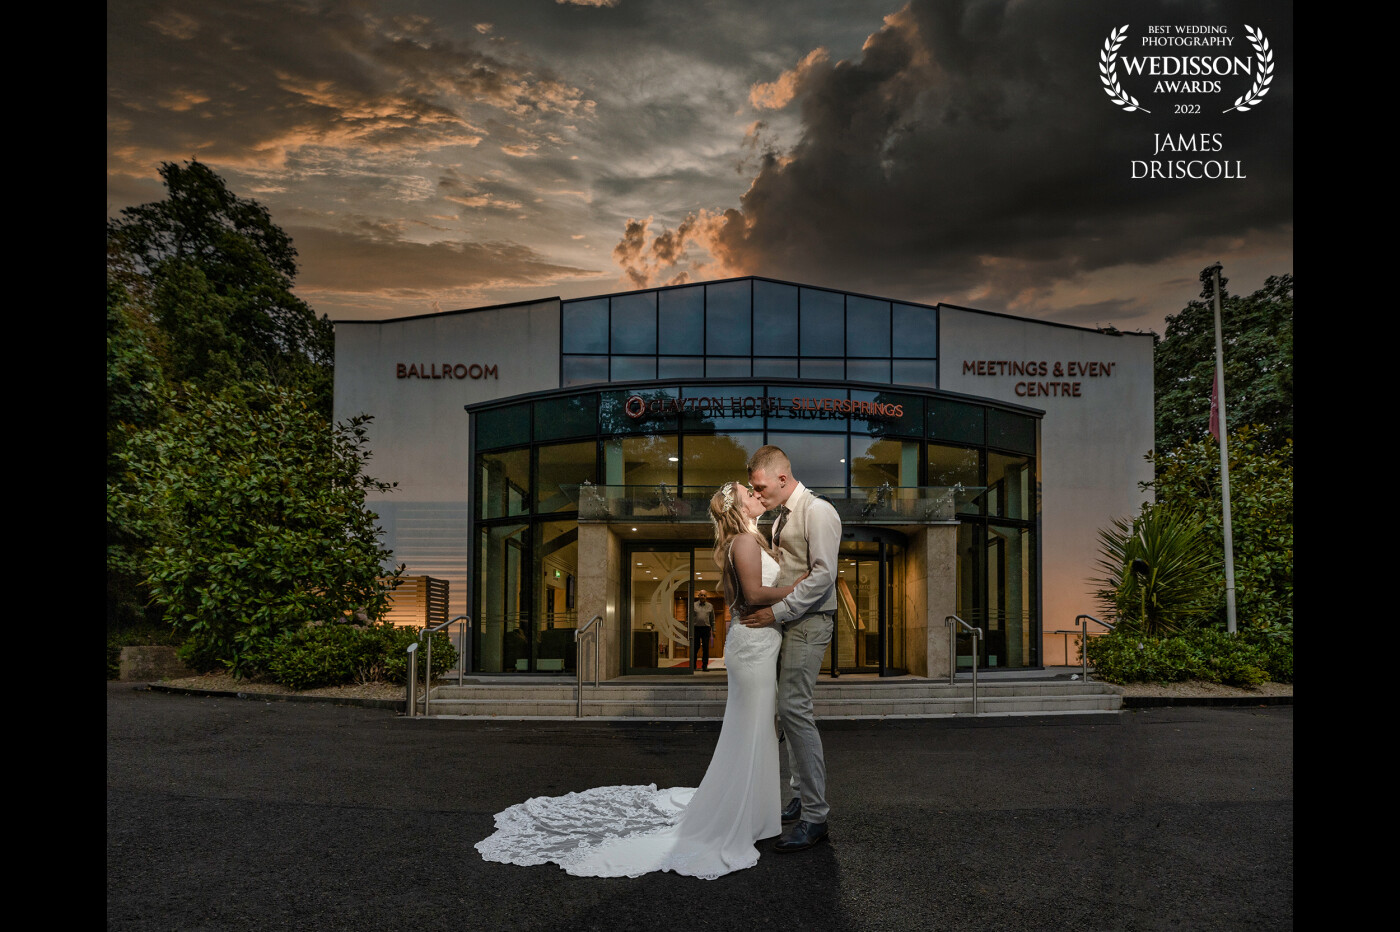 Sliversprings Cork, Graeme & Danielle,  the evening was wearing on and everyone had sat down to eat, when i walked outside and turned back and looked at the venue, saw a beautiful sunset so ran and grabbed my bride and groom for like 3 minutes.  They put forks down and followed me out and this was the outcome. One flash behind and one in front..